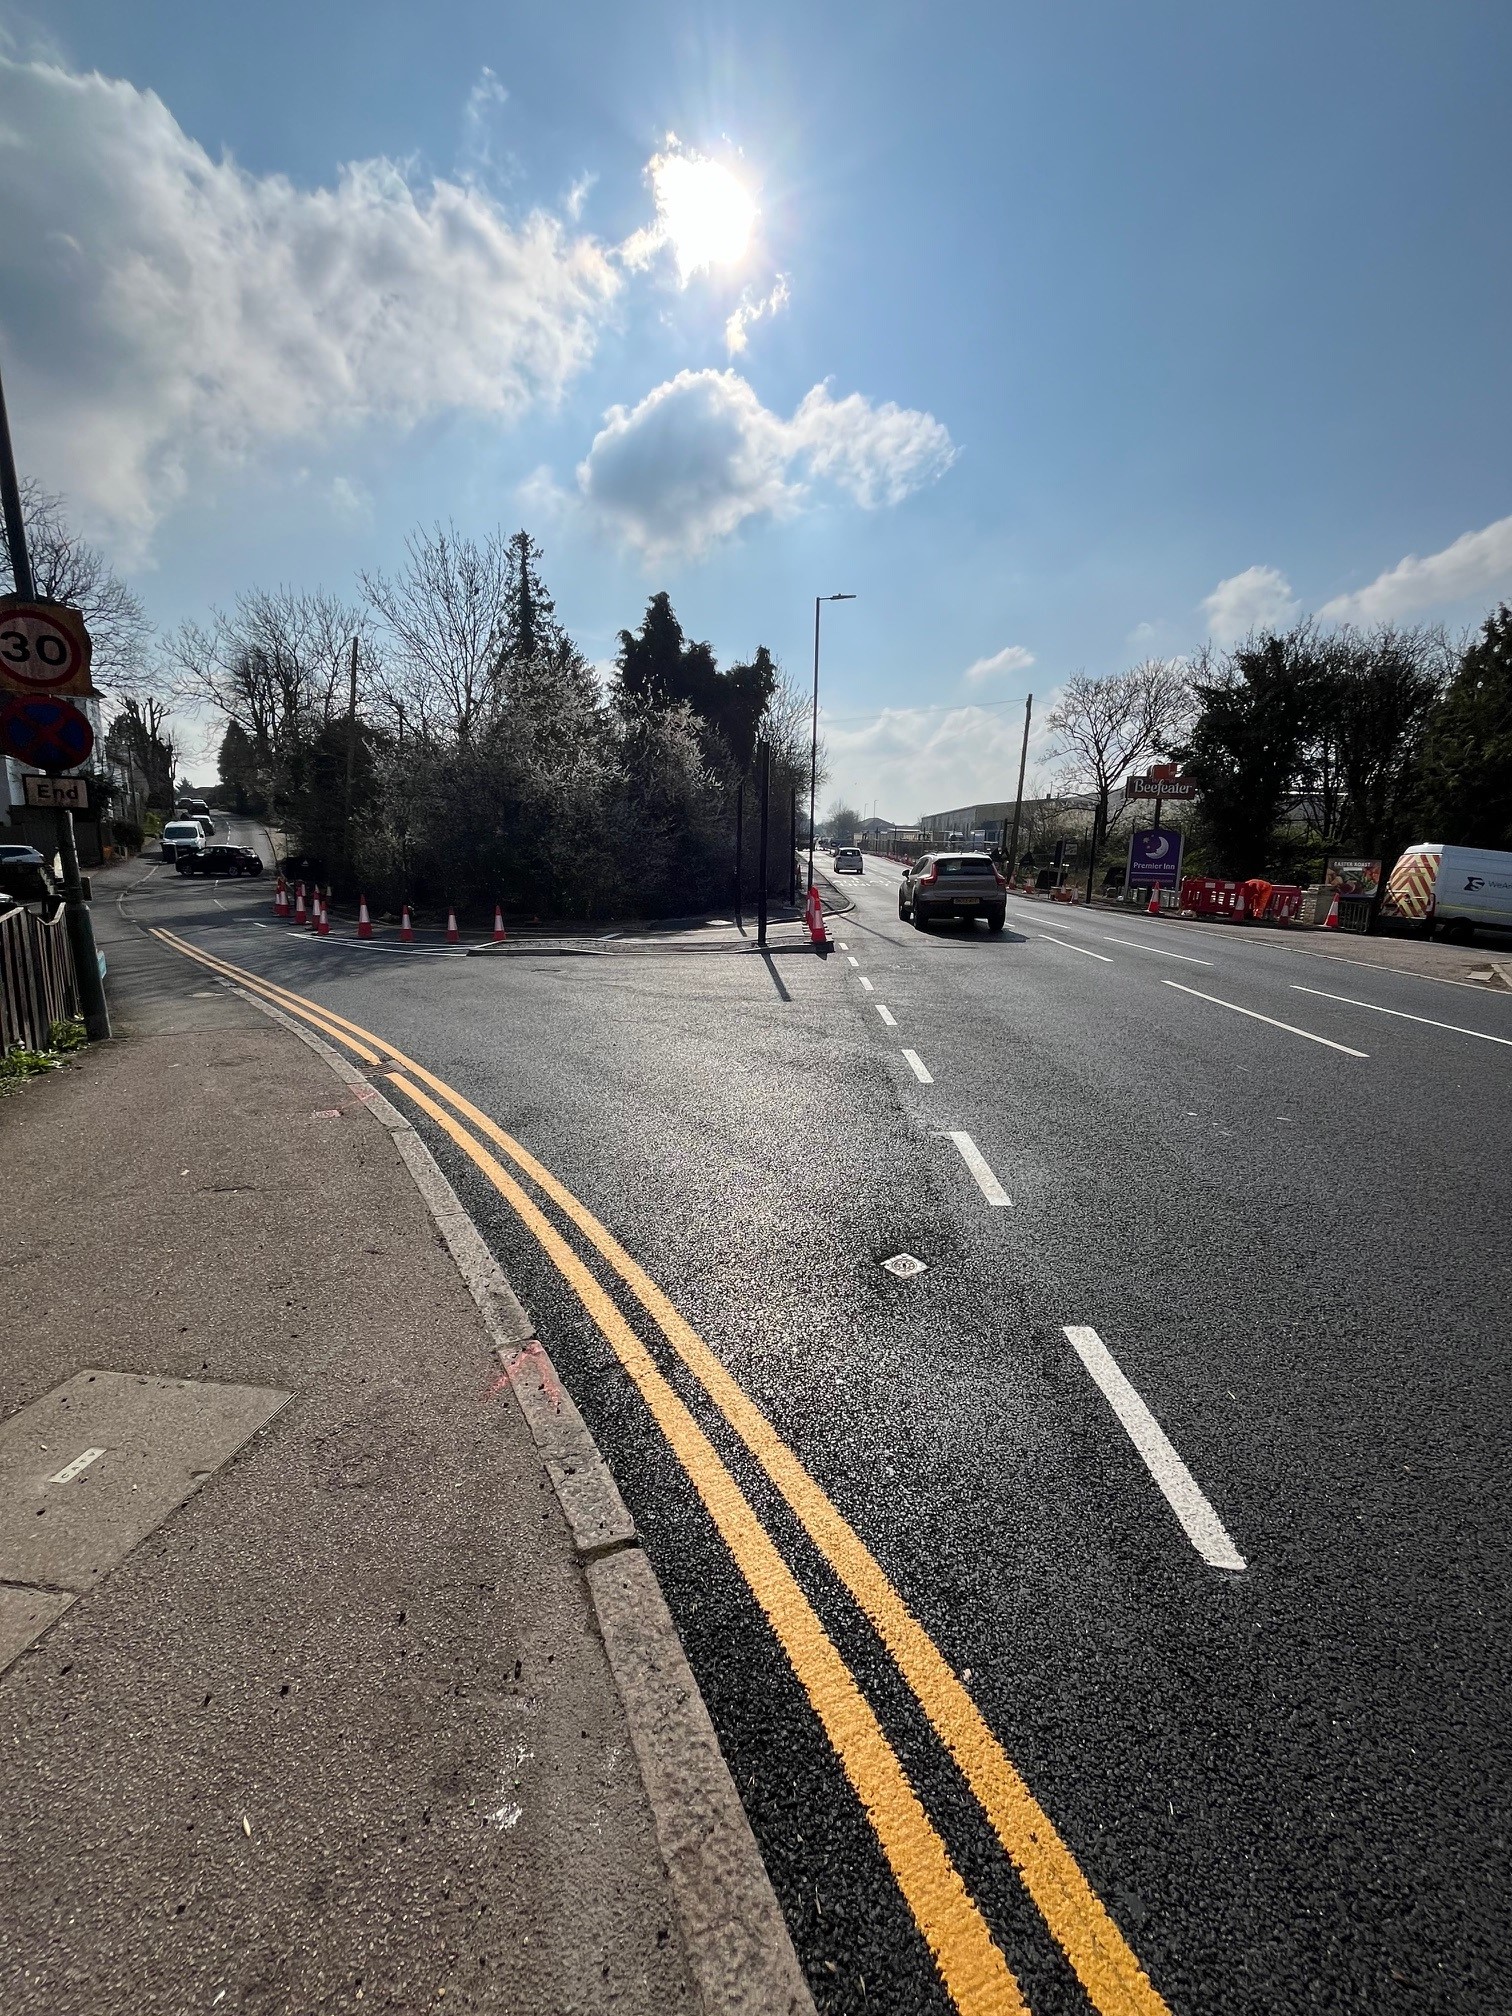 Image showing Cambridge Road improvements following resurfacing and new lining. Image also shows new connection into industrial estate.